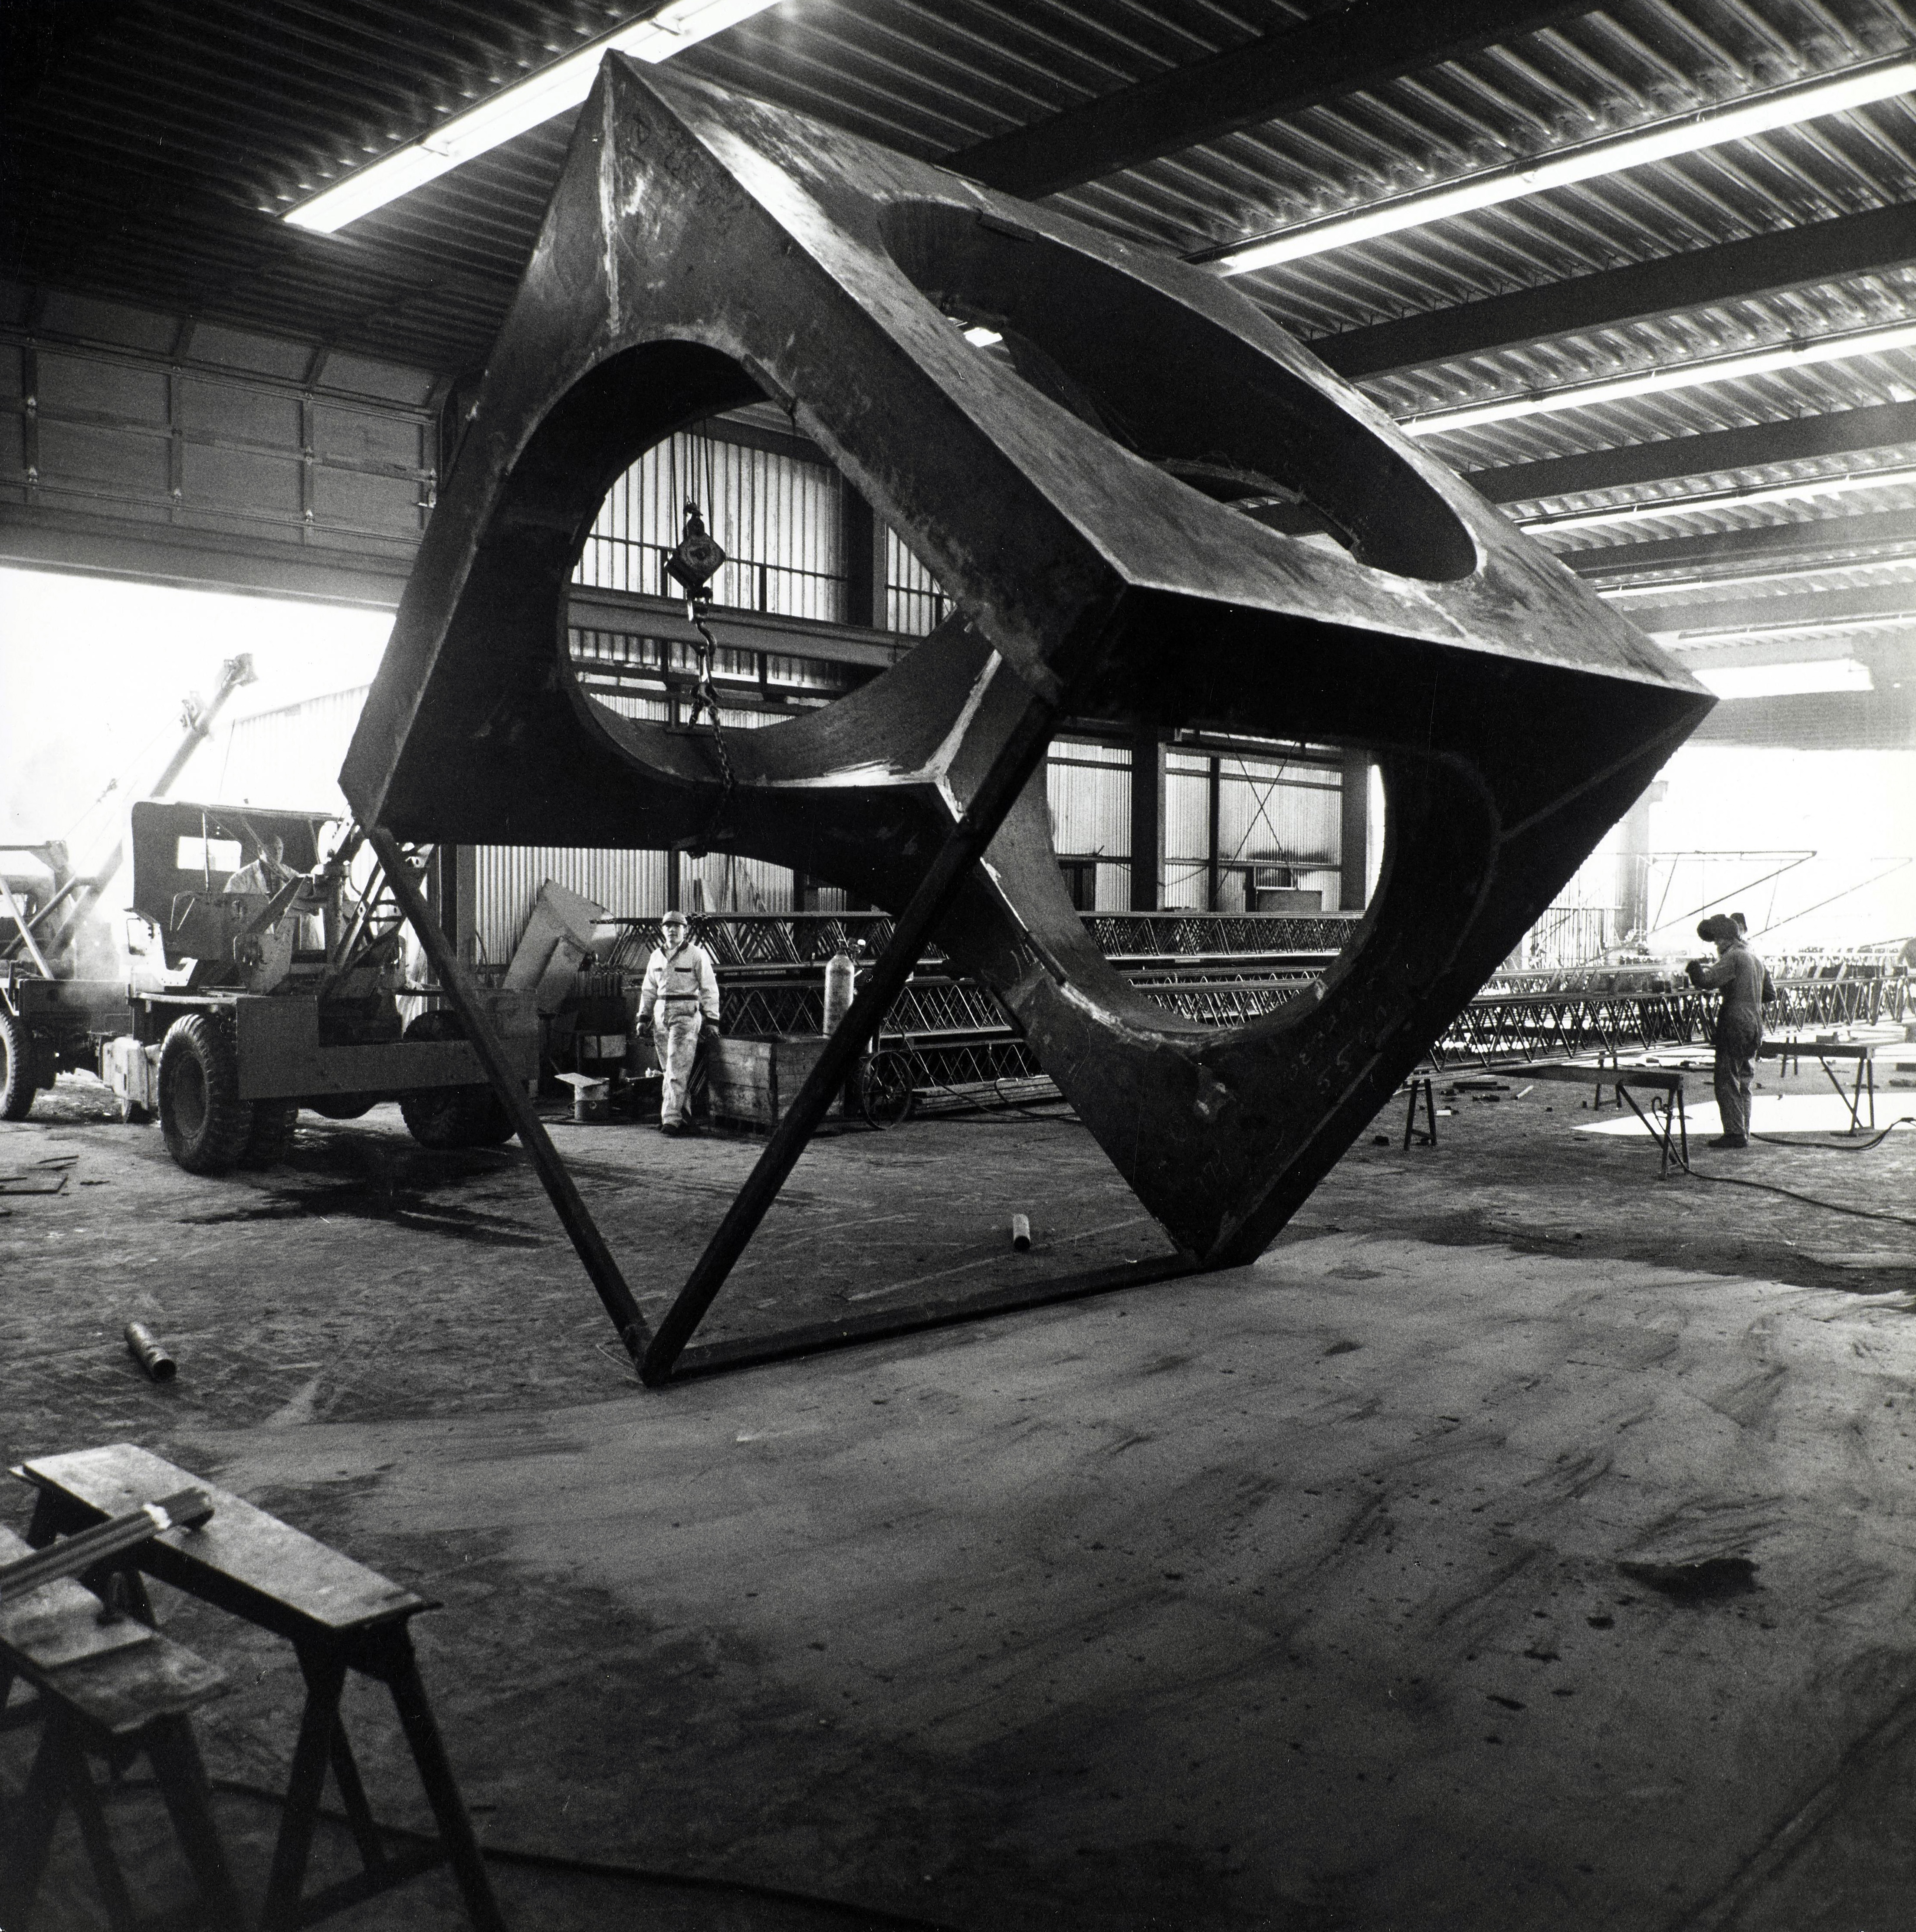 An unfinished Skyviewing sculpture hangs in a fabricating workshop